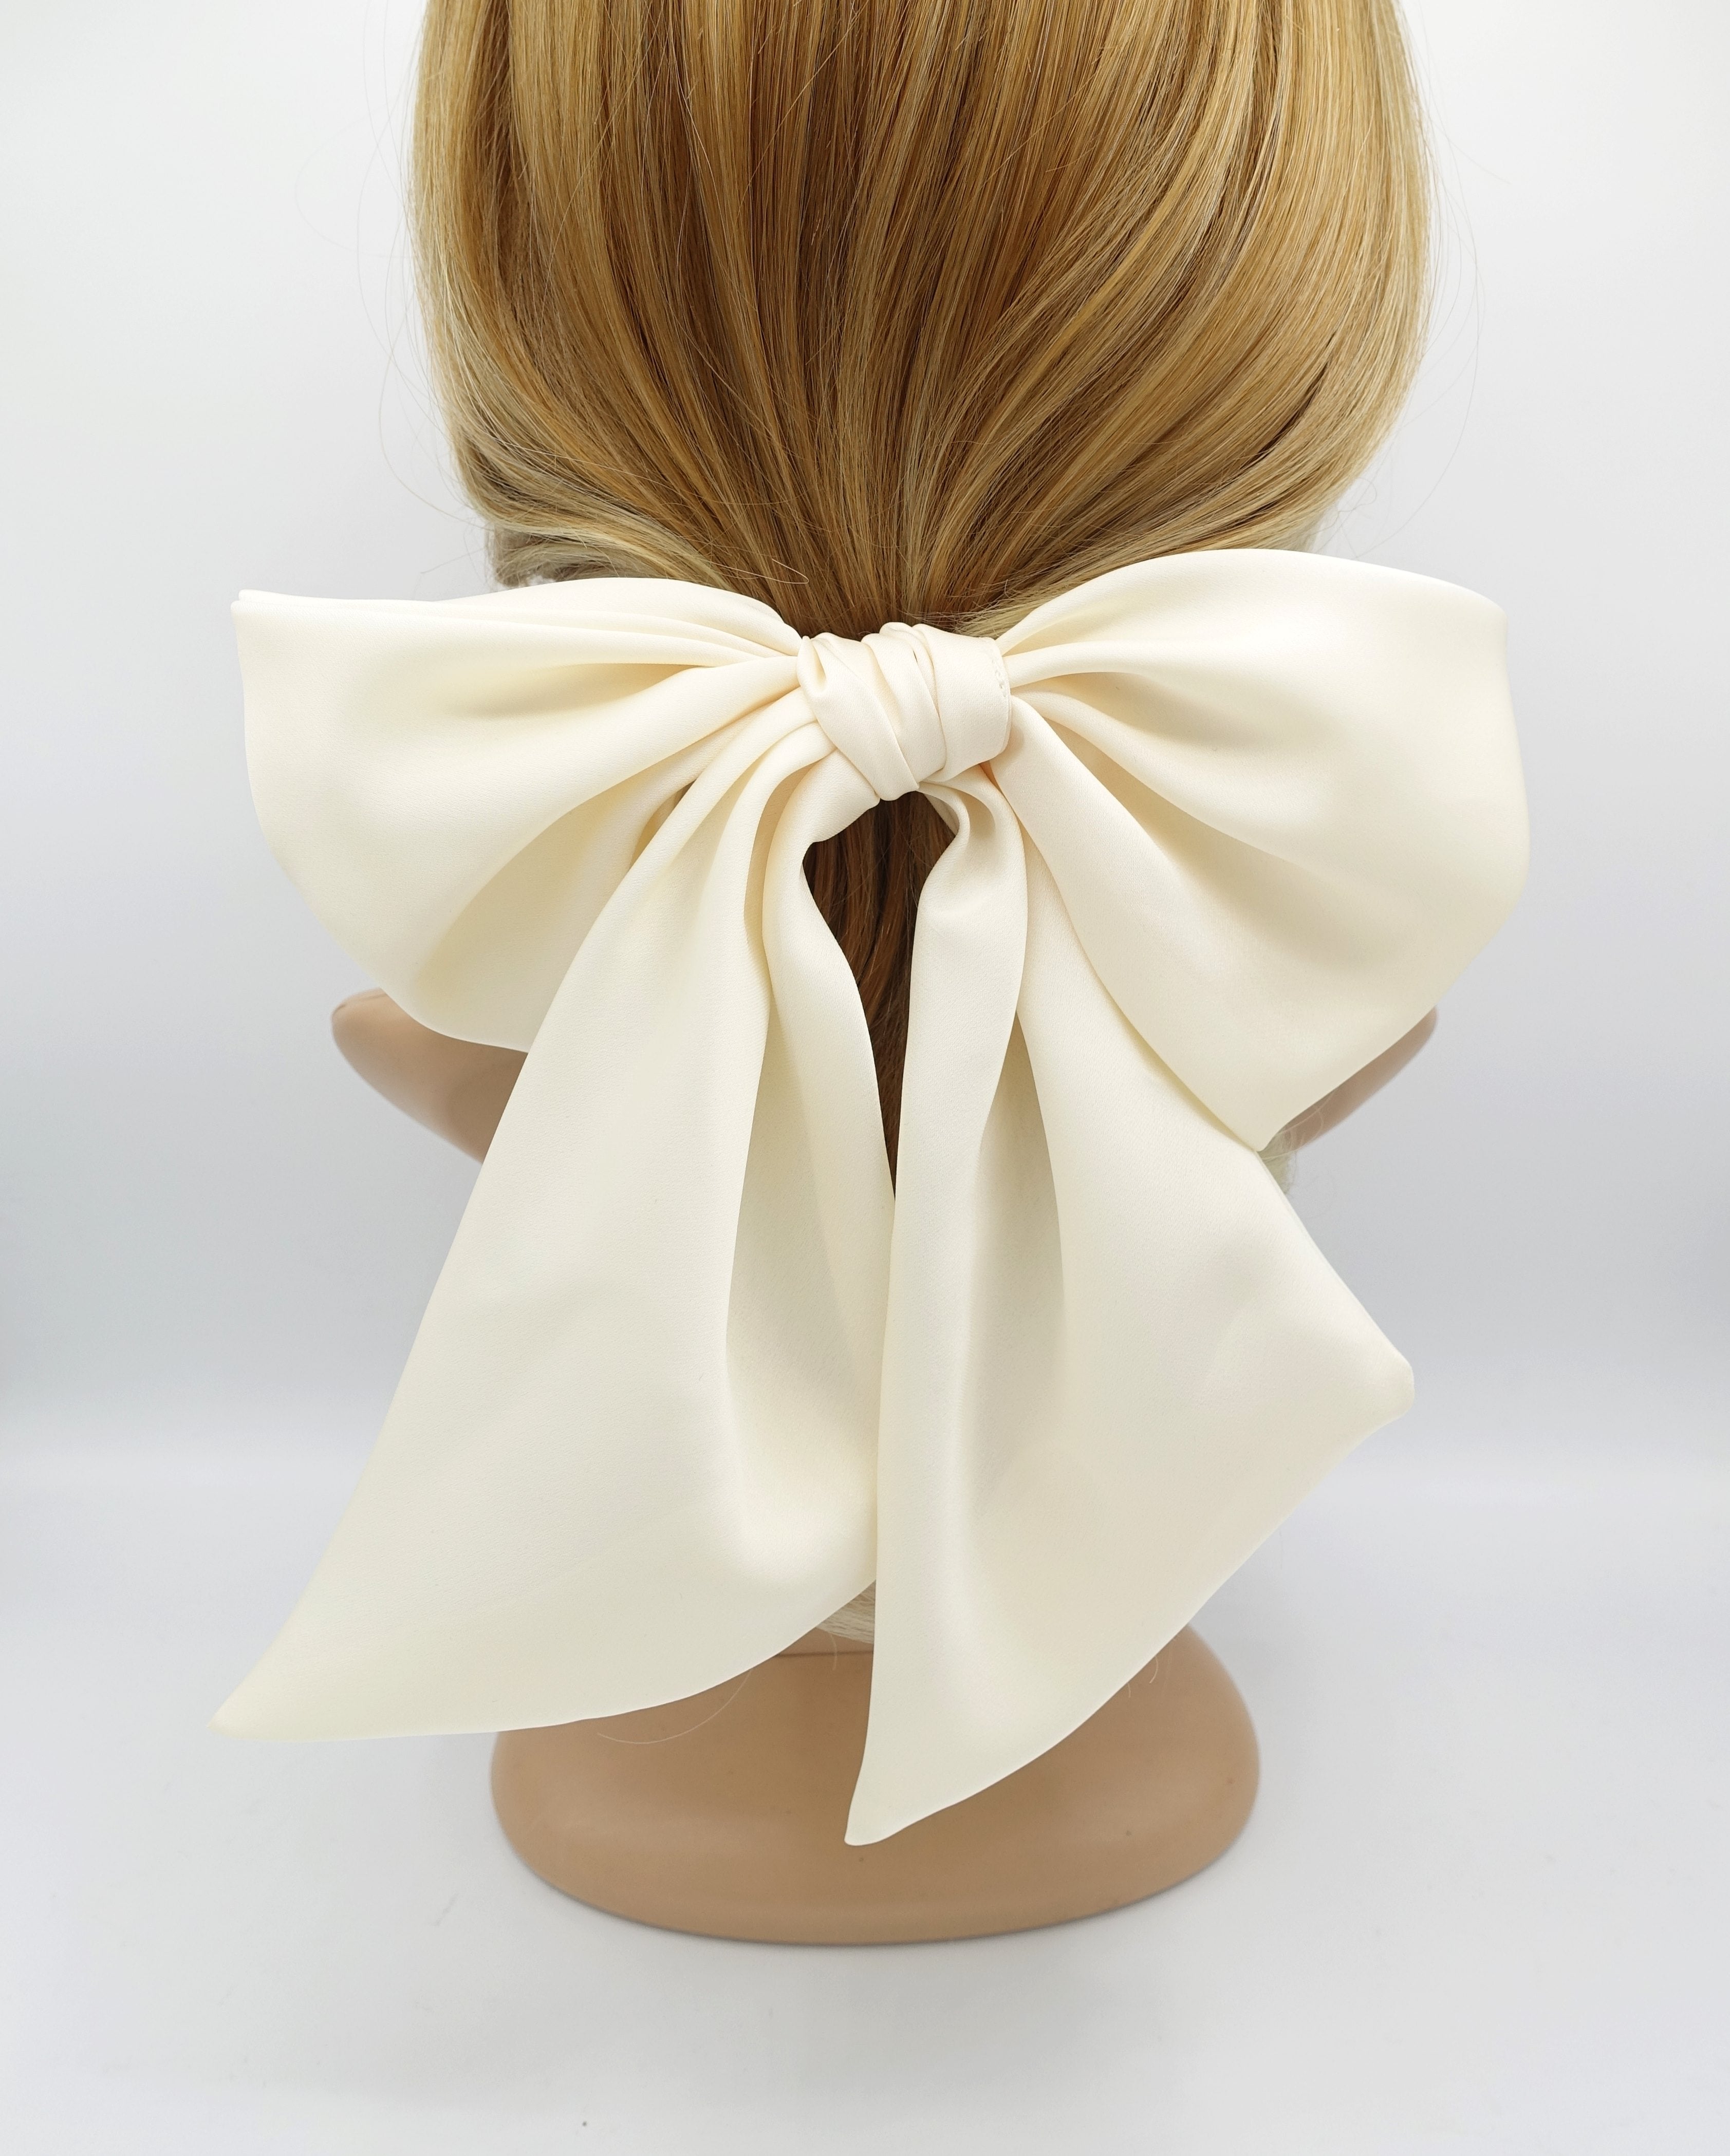 Giant hair bow series for hair bow lovers